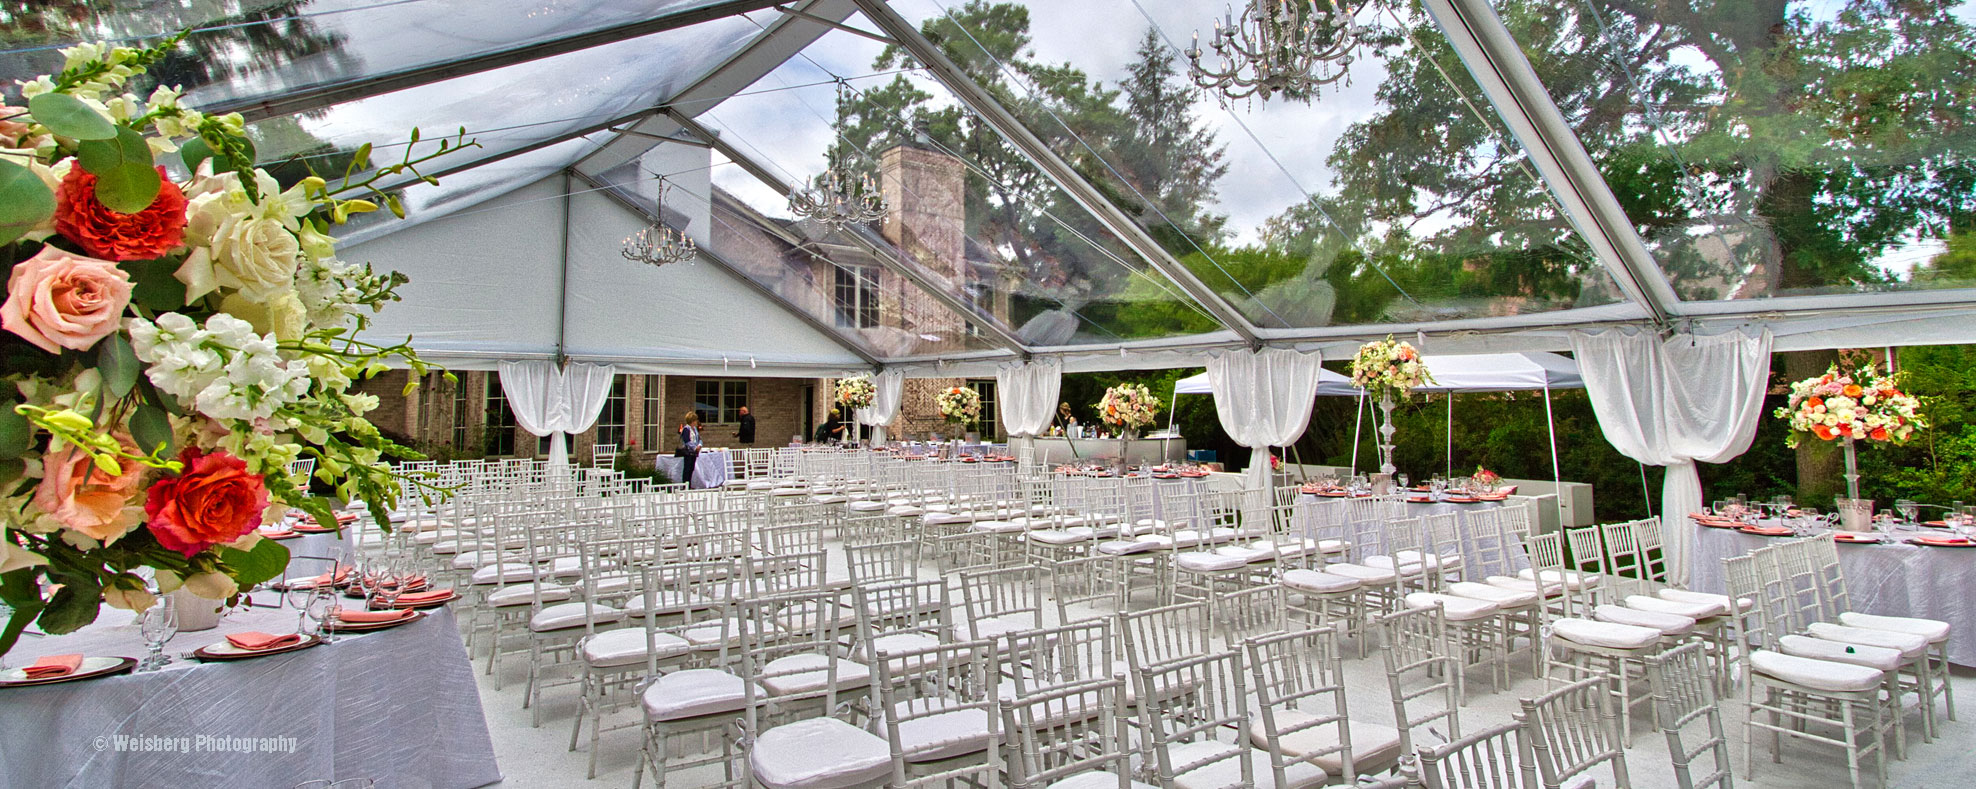 A large clear top frame tent with chairs set up for wedding ceremony